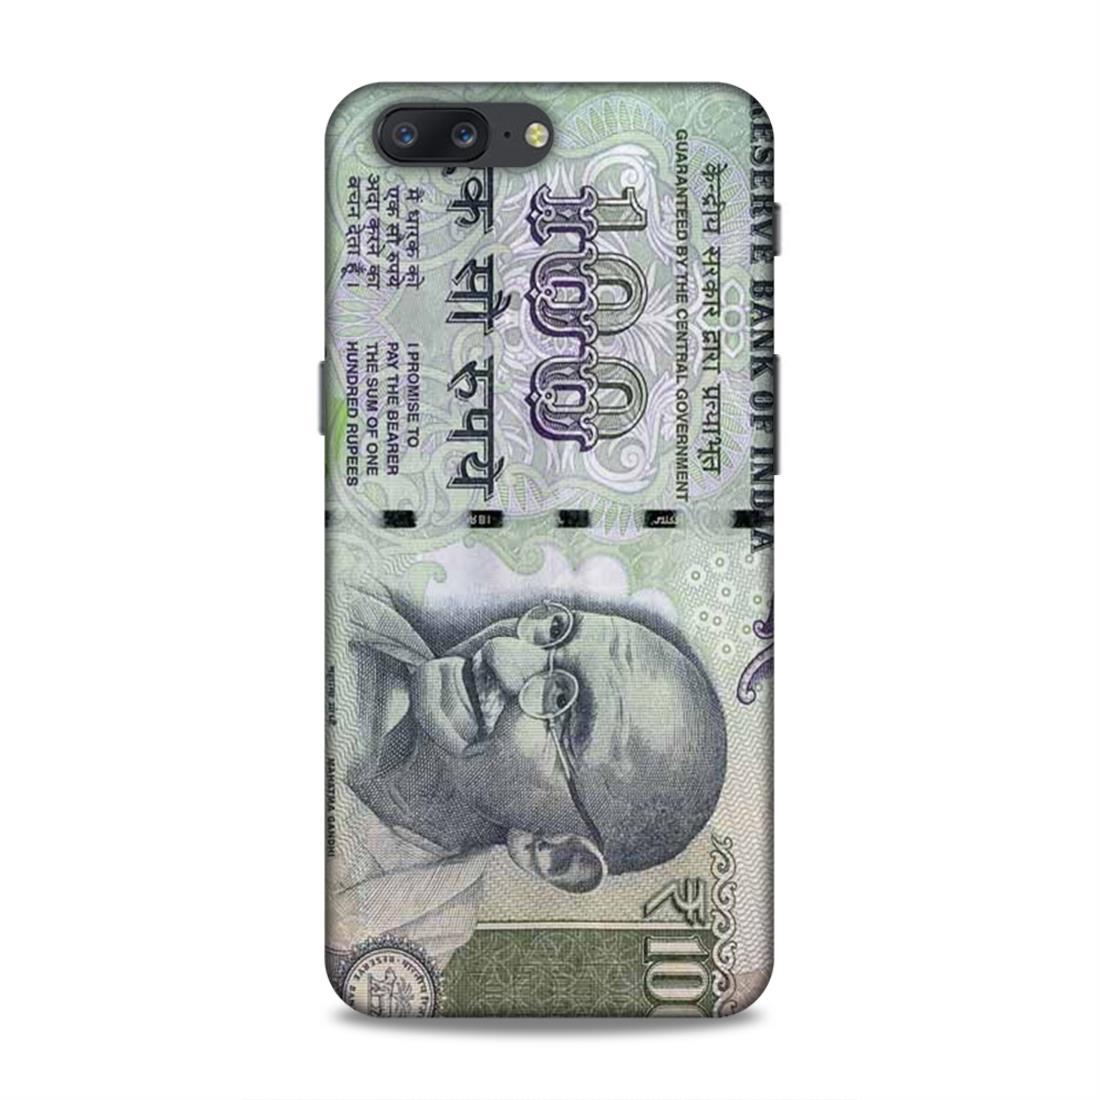 Rs 100 Currency Note OnePlus 5 Phone Cover Case